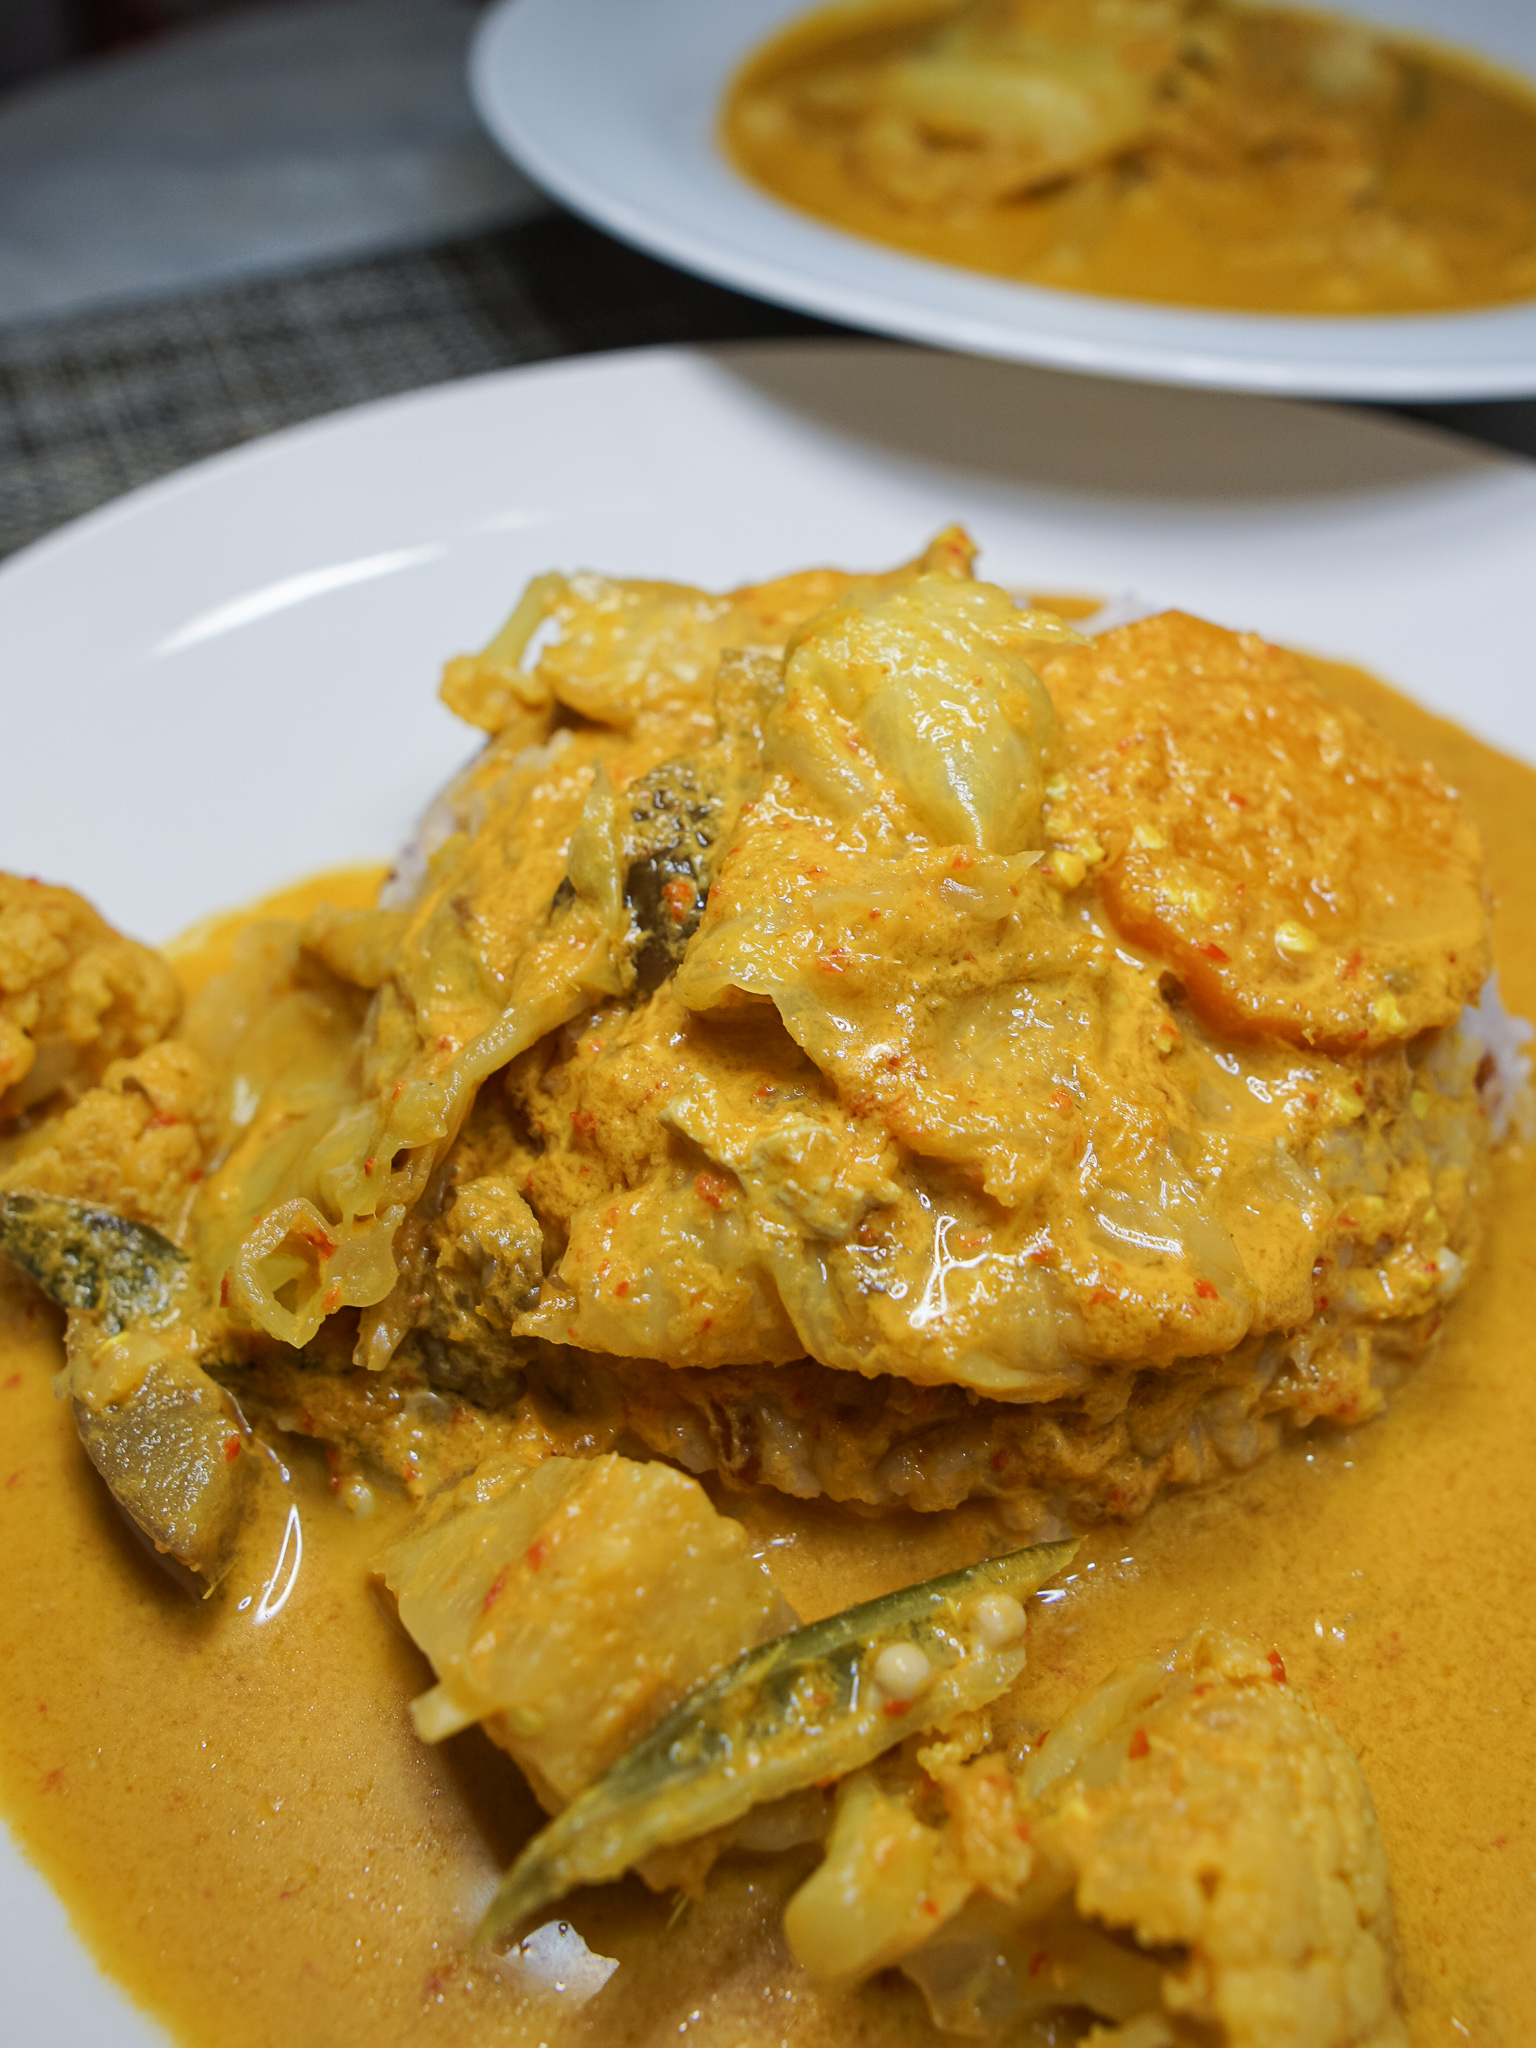 Singapore ‘Cai Png’ Vegetable Curry Recipe | Economy Rice Cai Fan Curry